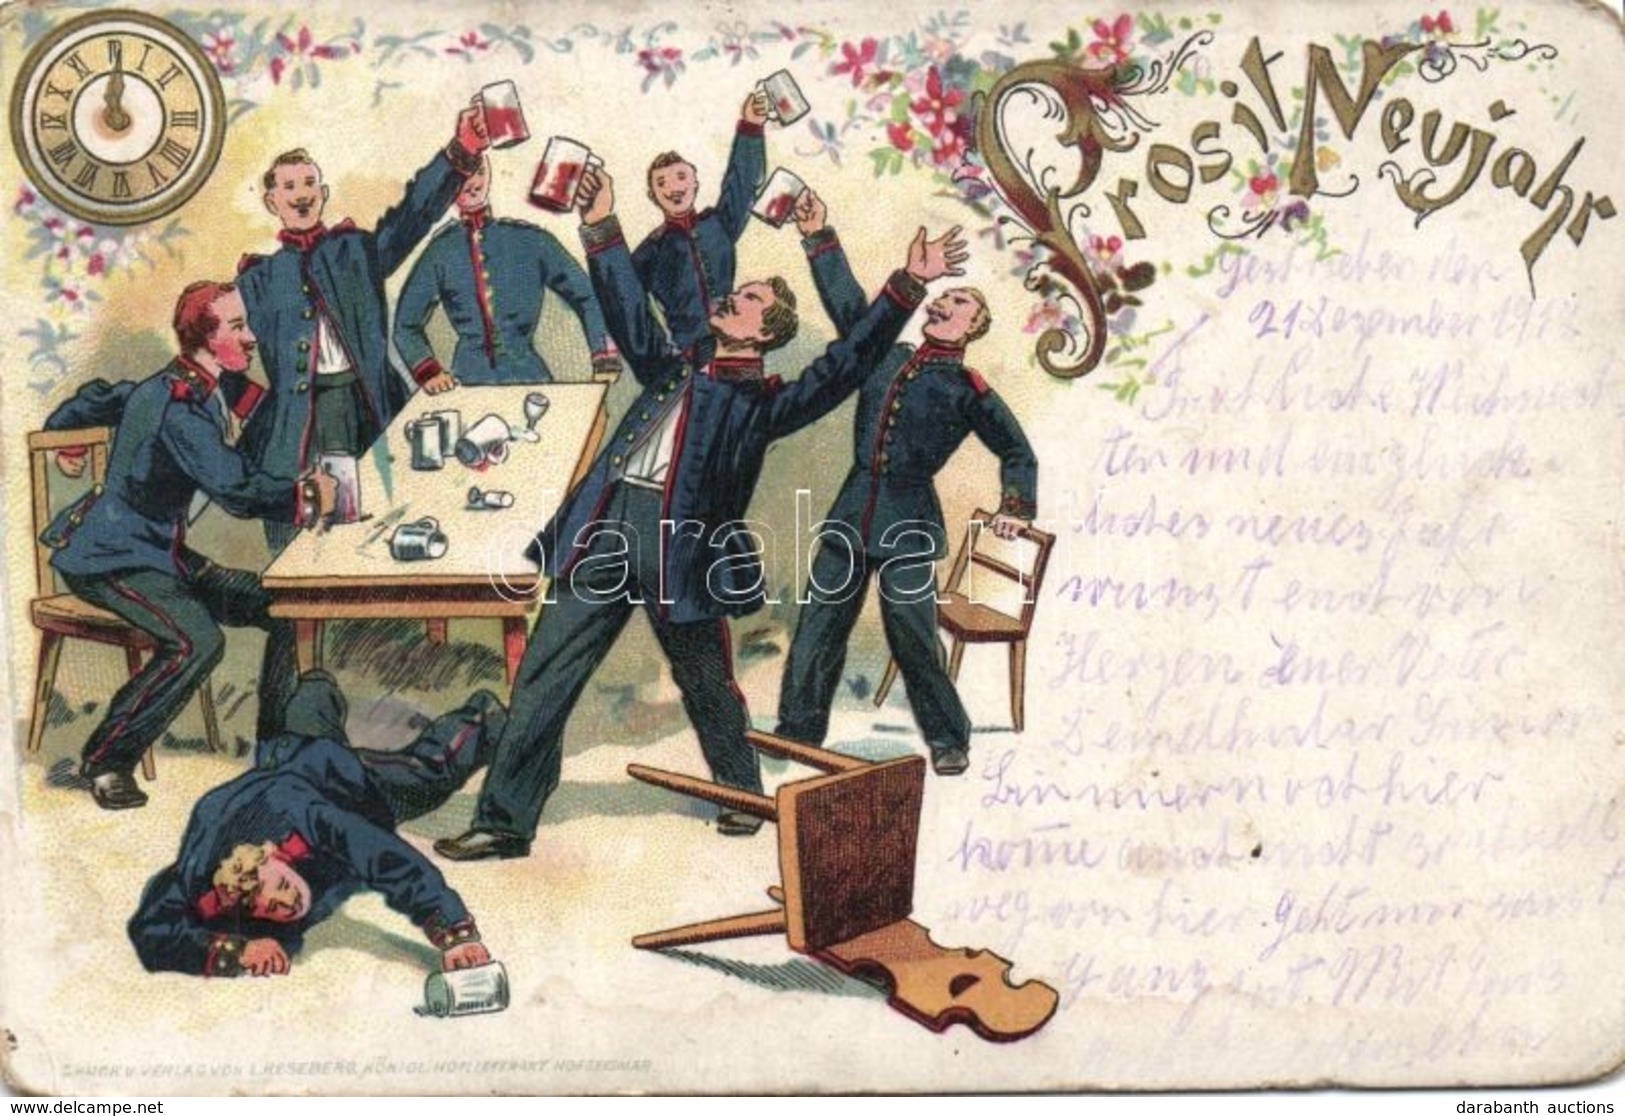 T2/T3 Prosit Neujahr / German Military New Year Greeting Art Postcard With Drunk Soldiers. Floral Litho L. Keseberg (wor - Unclassified